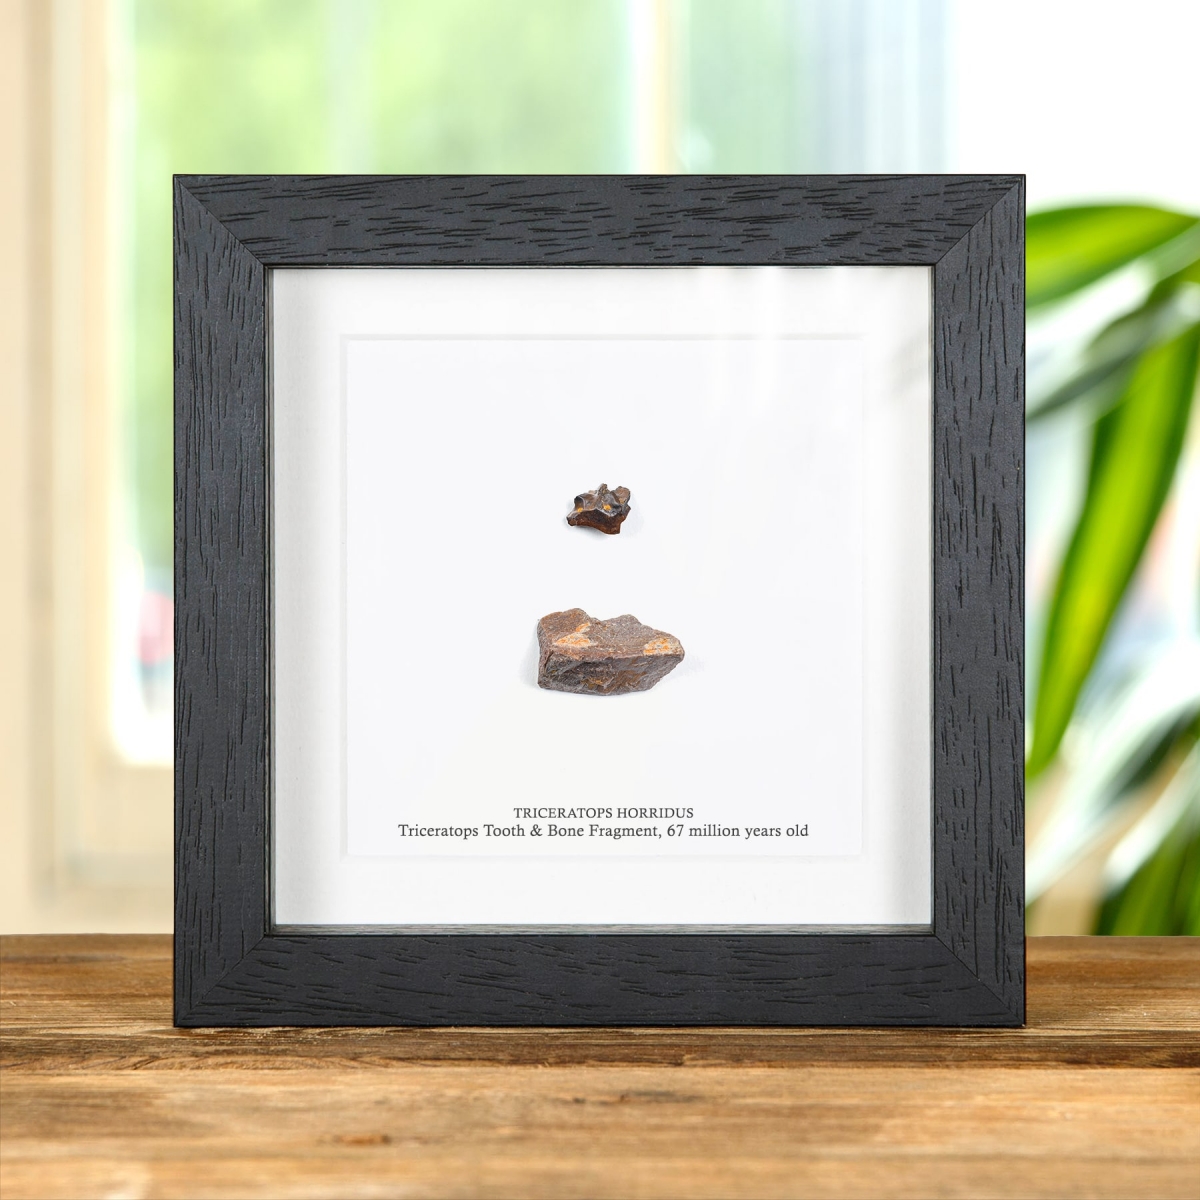 Minibeast Triceratops Tooth & Bone Fragment Fossil In Box Frame (Triceratops horridus)